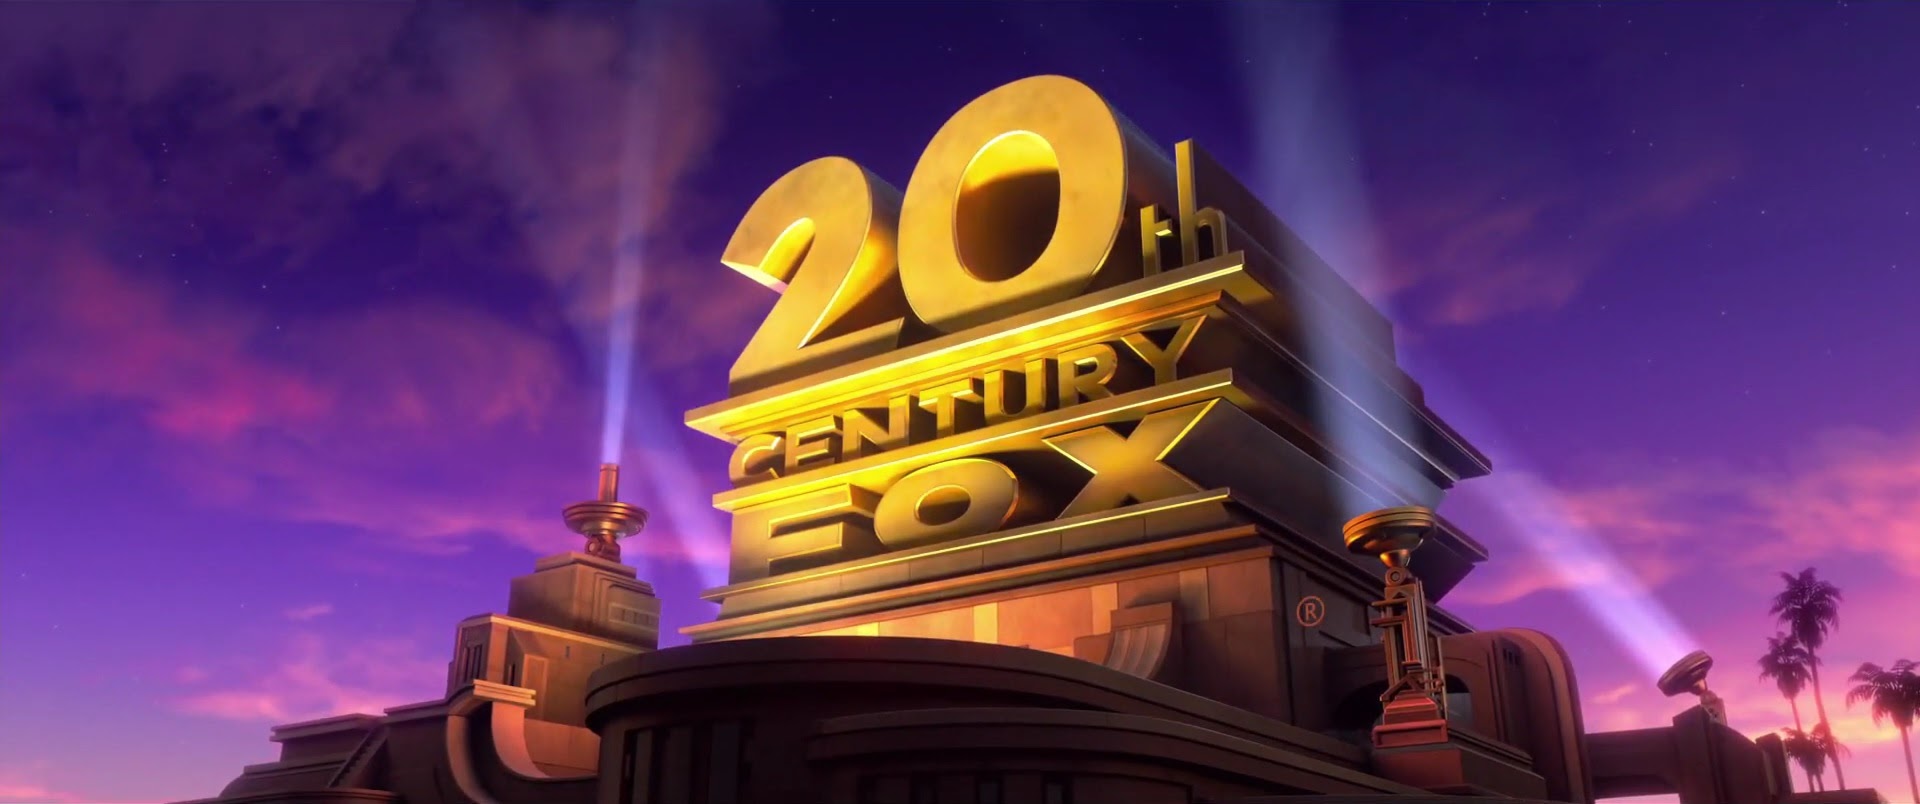 Vintage 20th century fox 1953 sky background for your retro projects